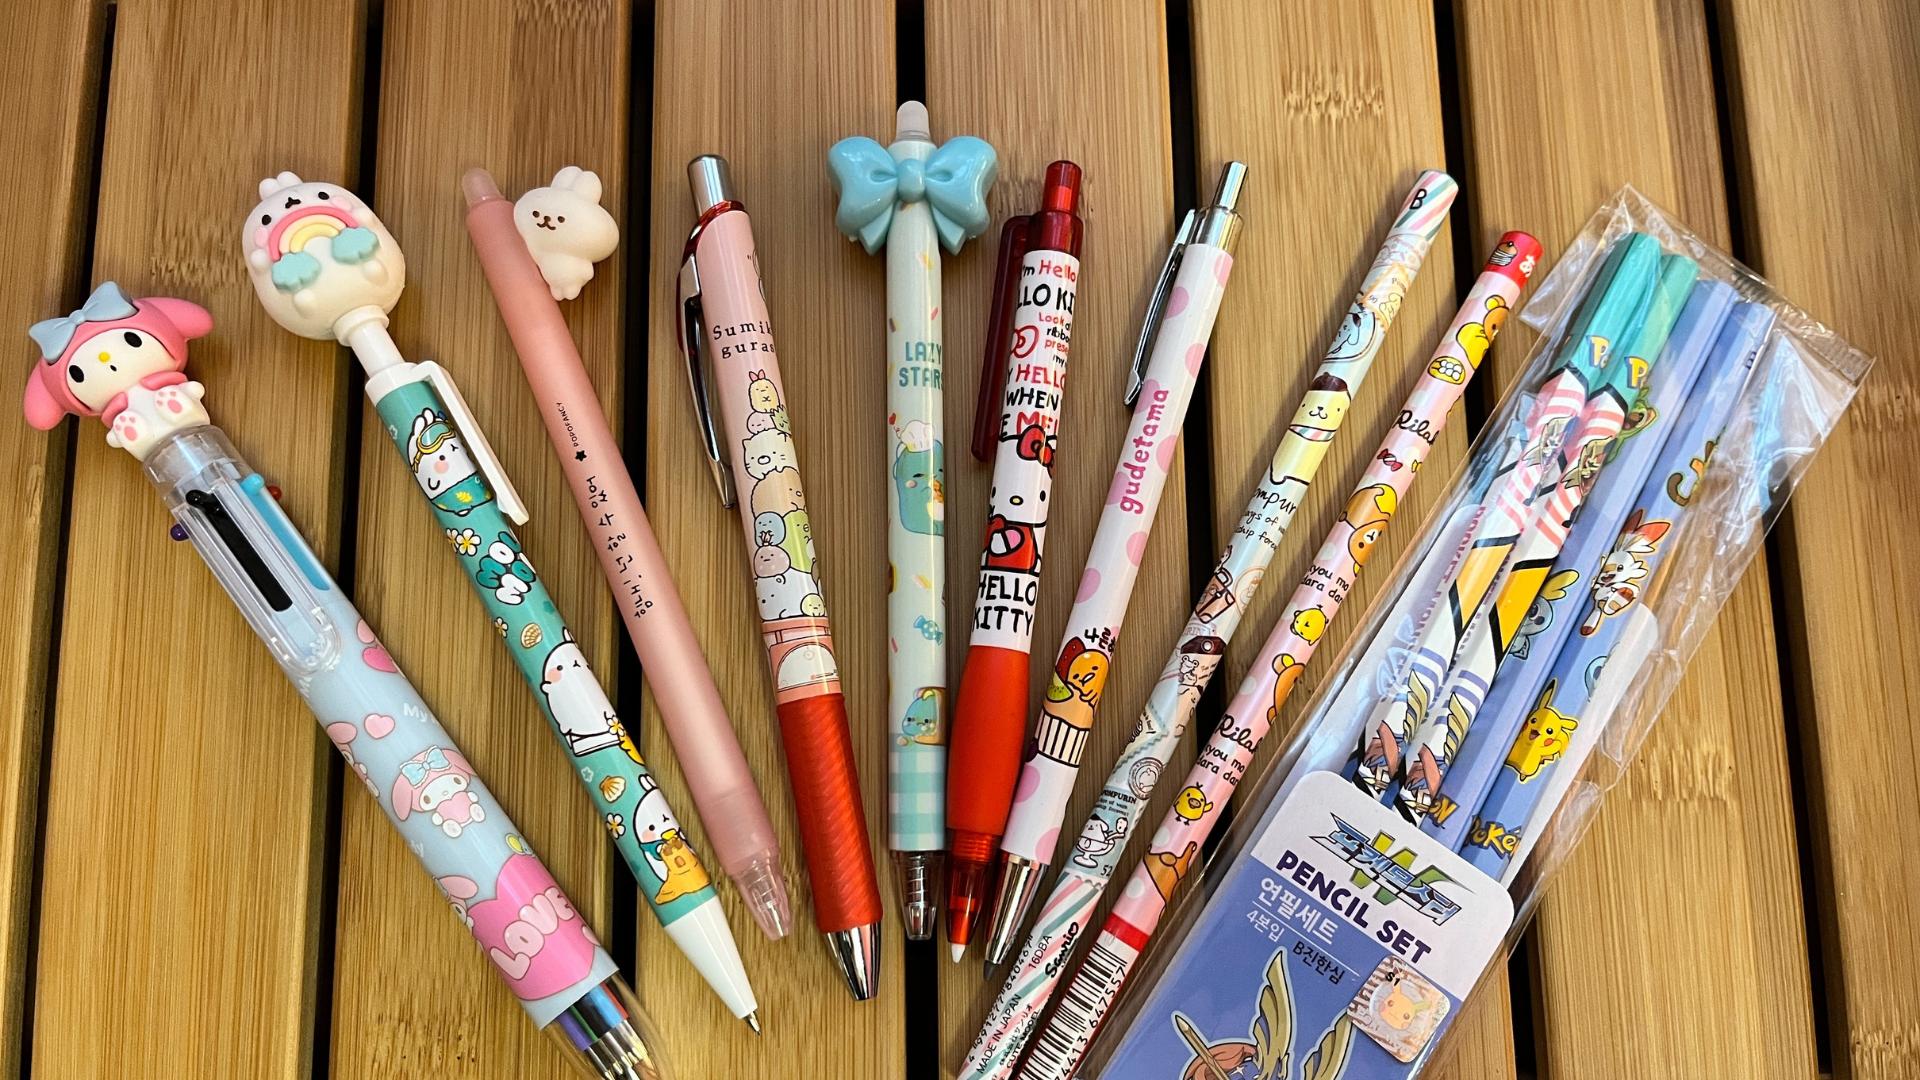 SALE Kawaii Stationery Set, Happy Mail, Japanese Stationery, Floral,  Journal Supplies,, Pen Pal, Letter Writing, Cute Stationery. 